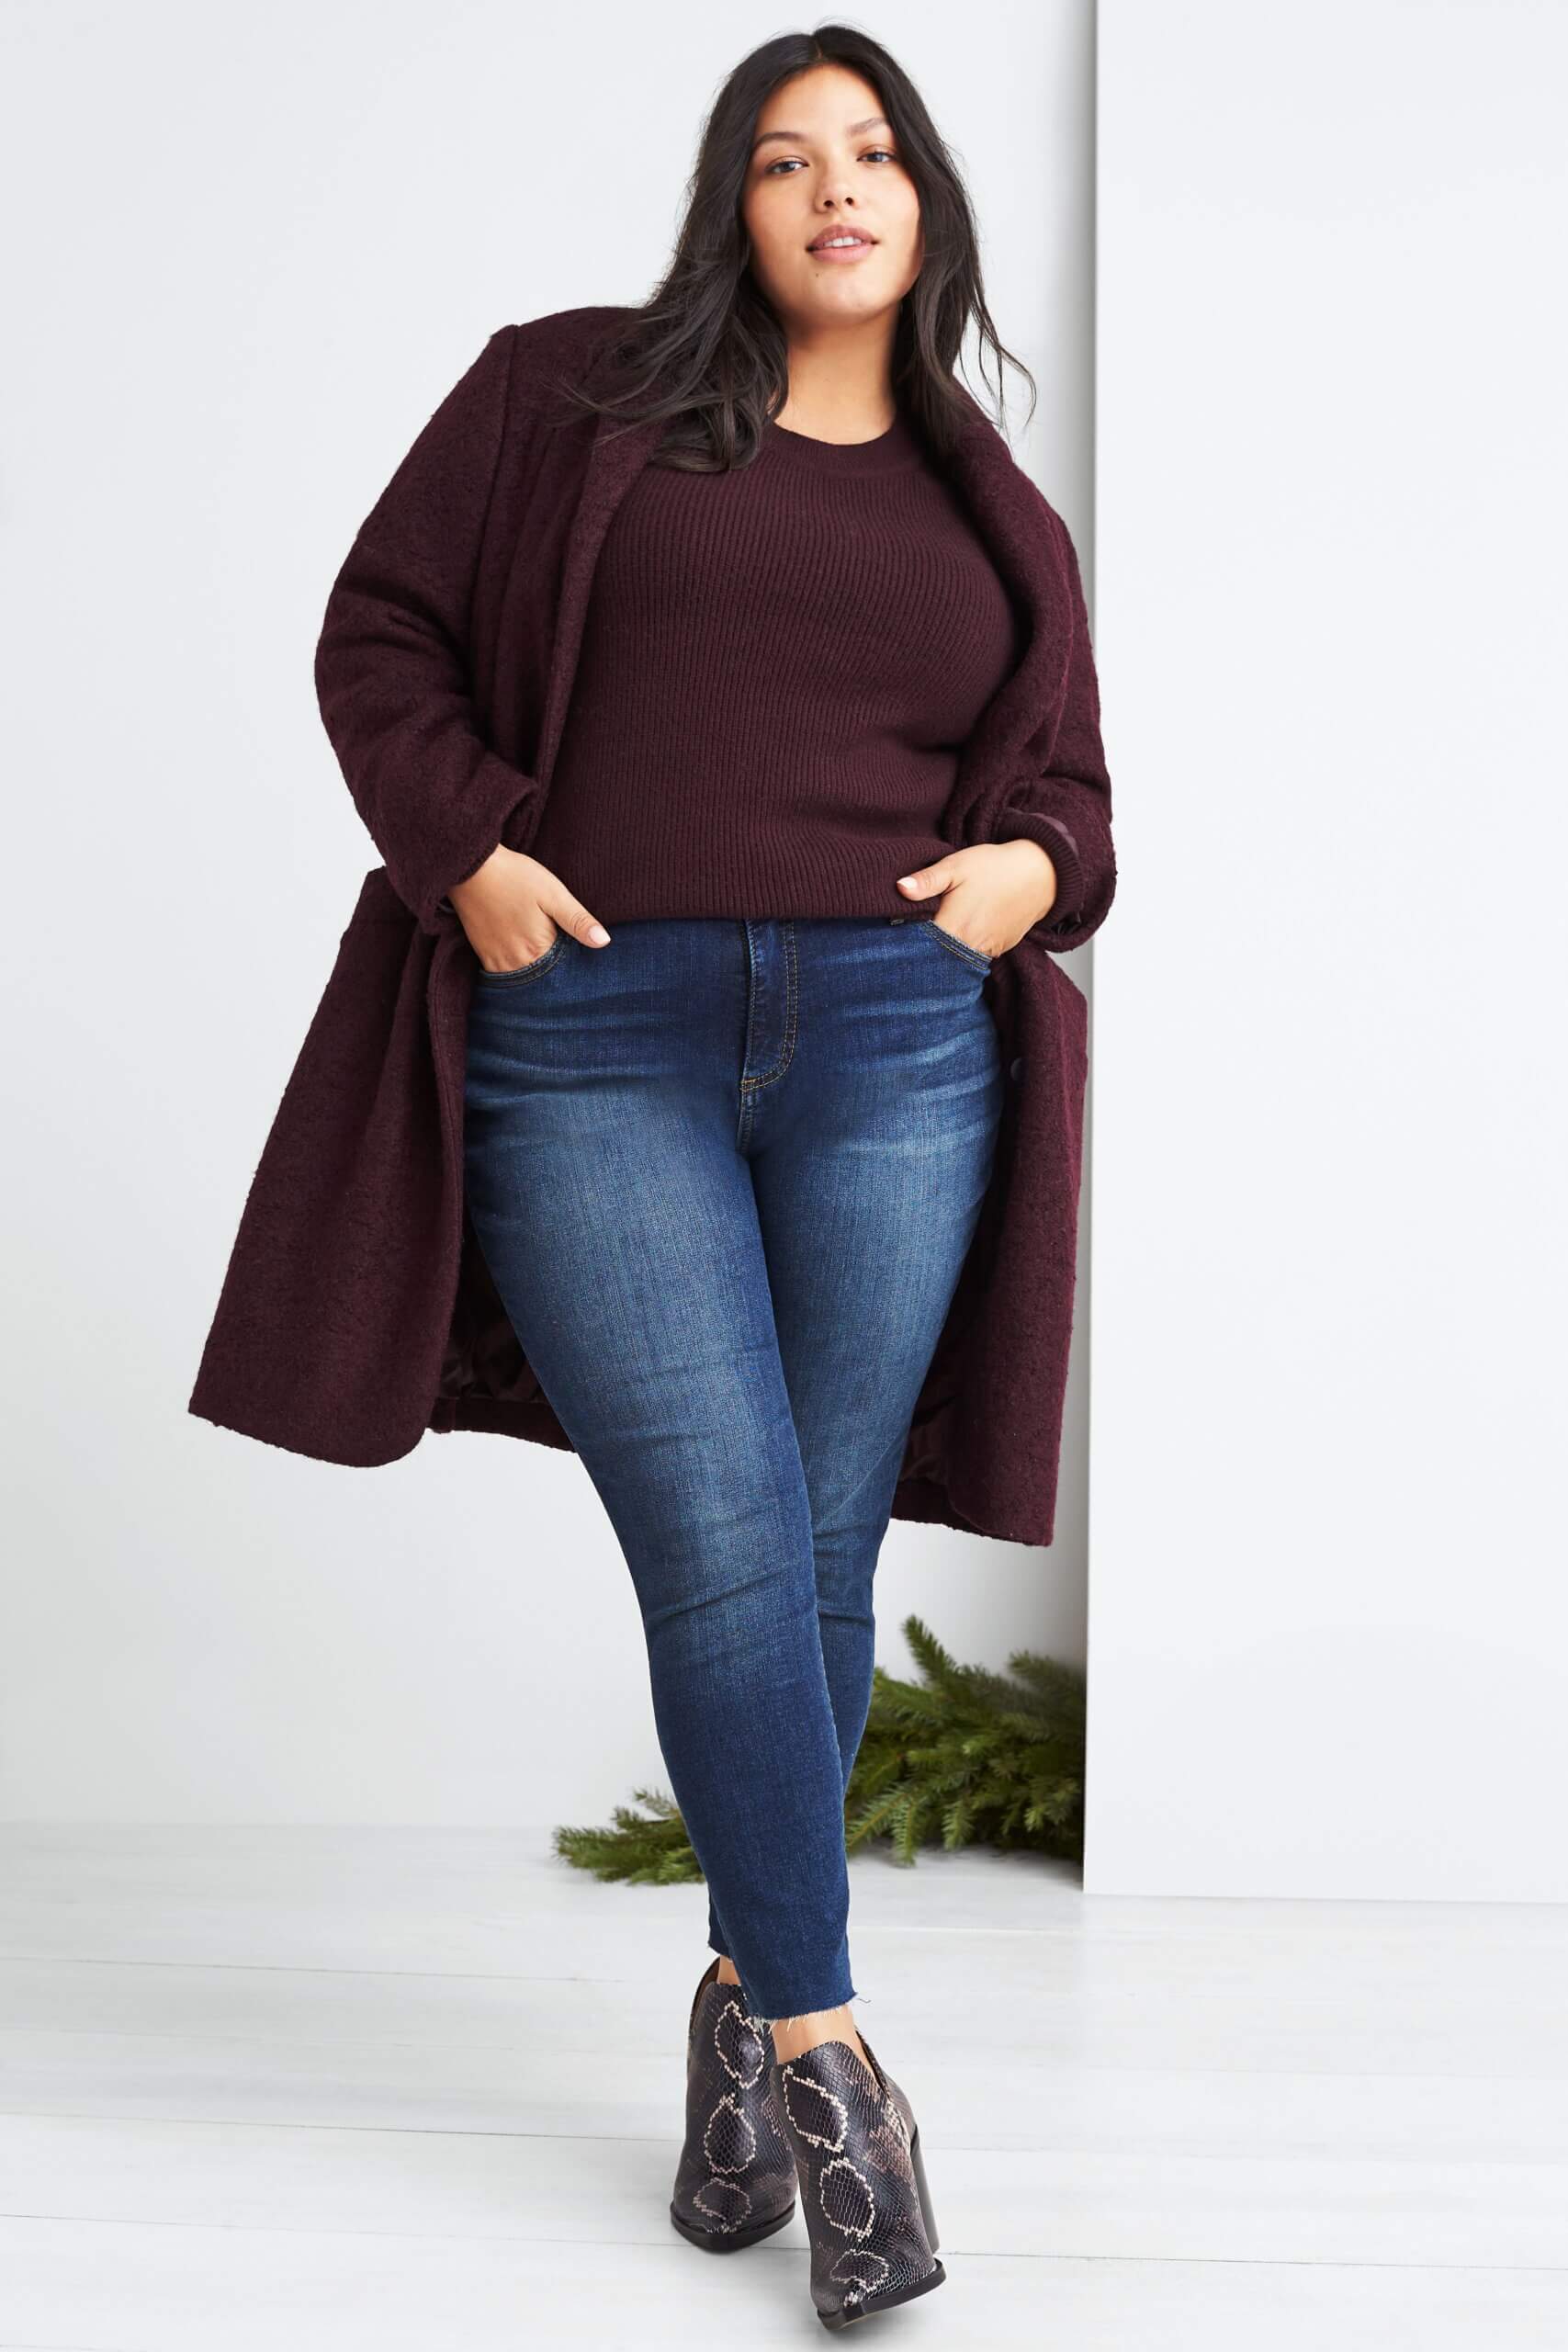 How to Choose the Perfect Plus-Size Coat for Your Body Shape